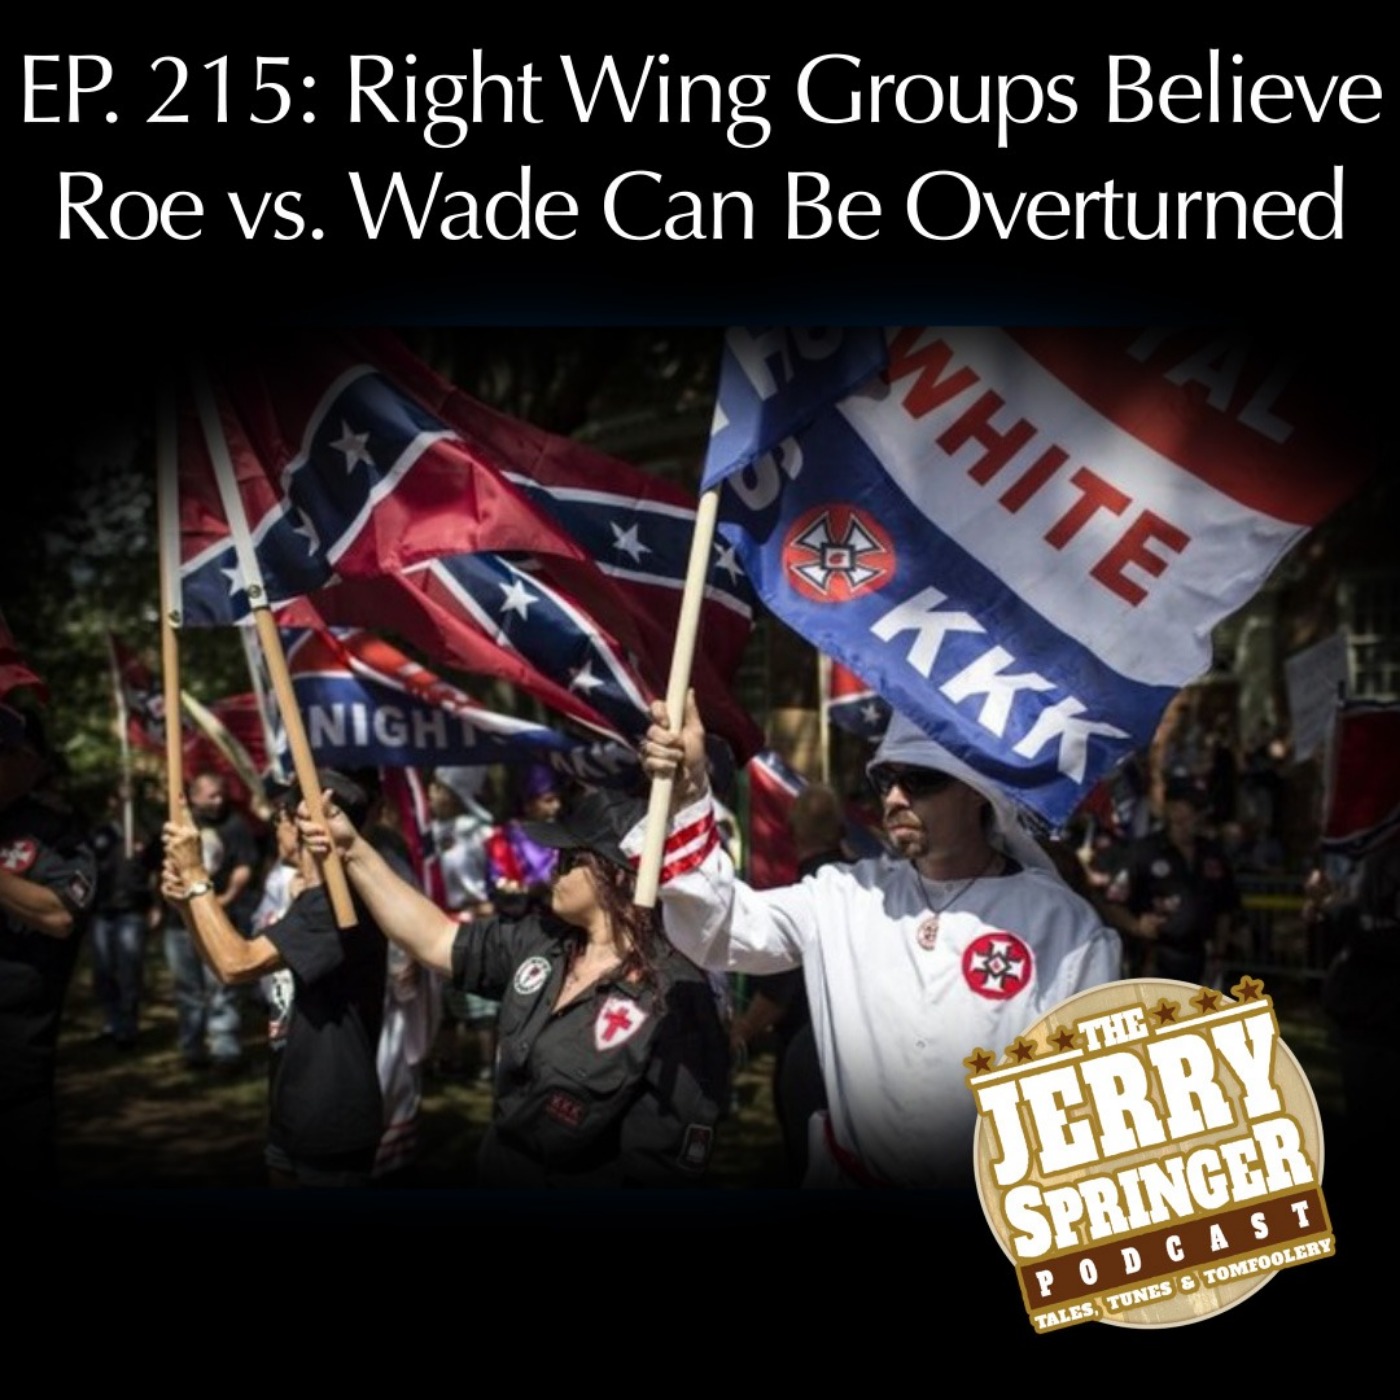 Right Wing Groups Believe Roe vs. Wade Can Be Overturned - EP 215